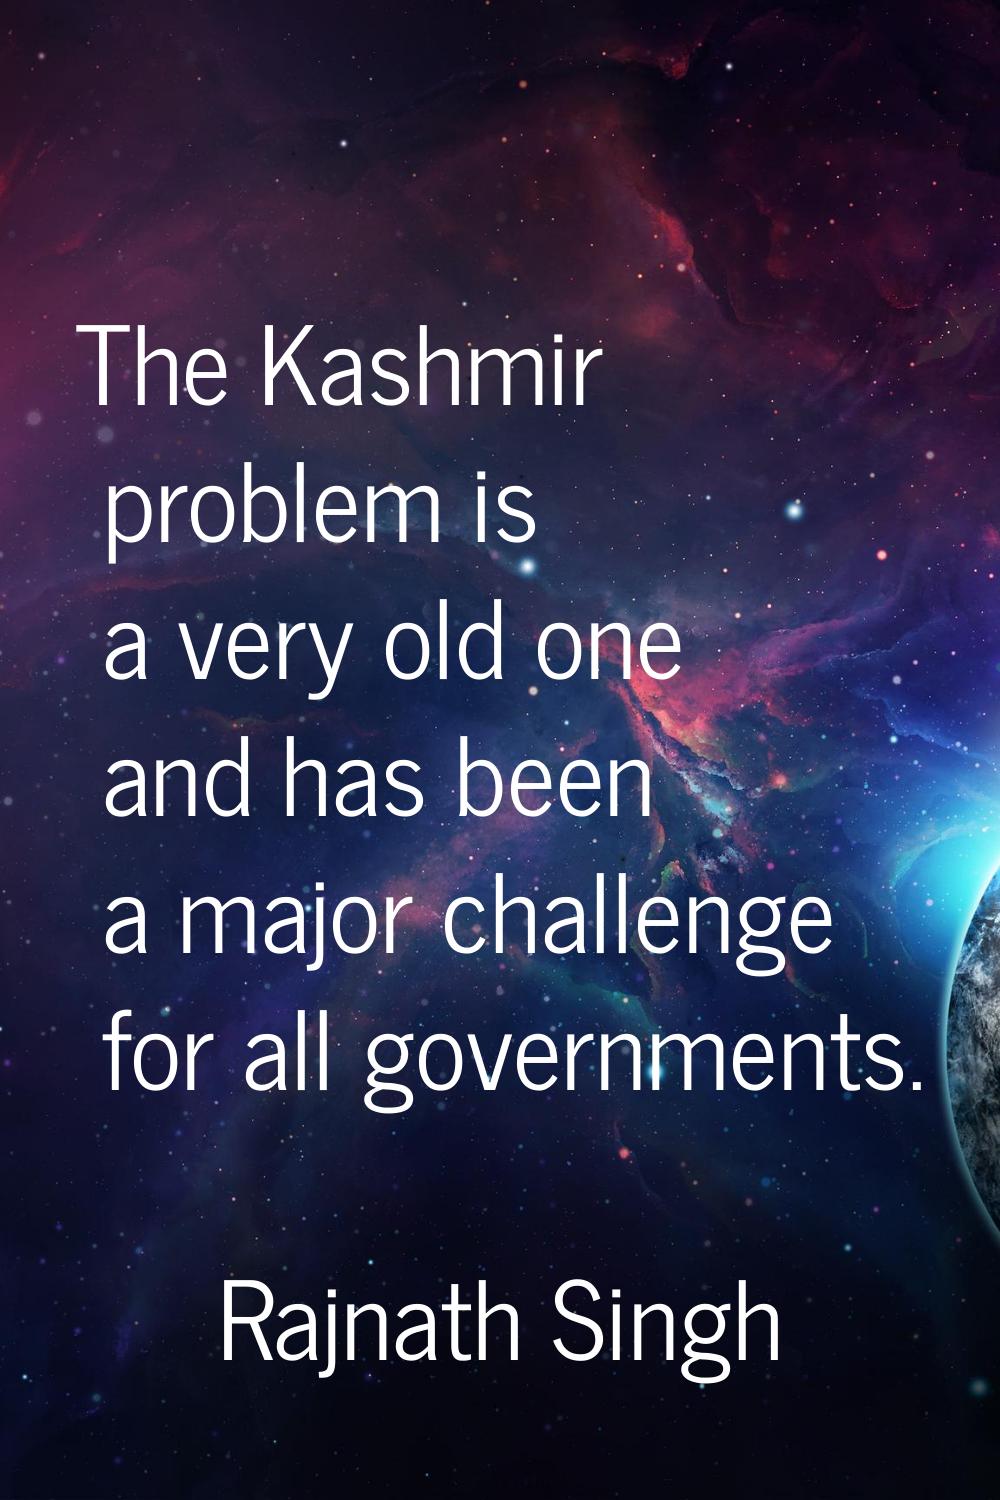 The Kashmir problem is a very old one and has been a major challenge for all governments.